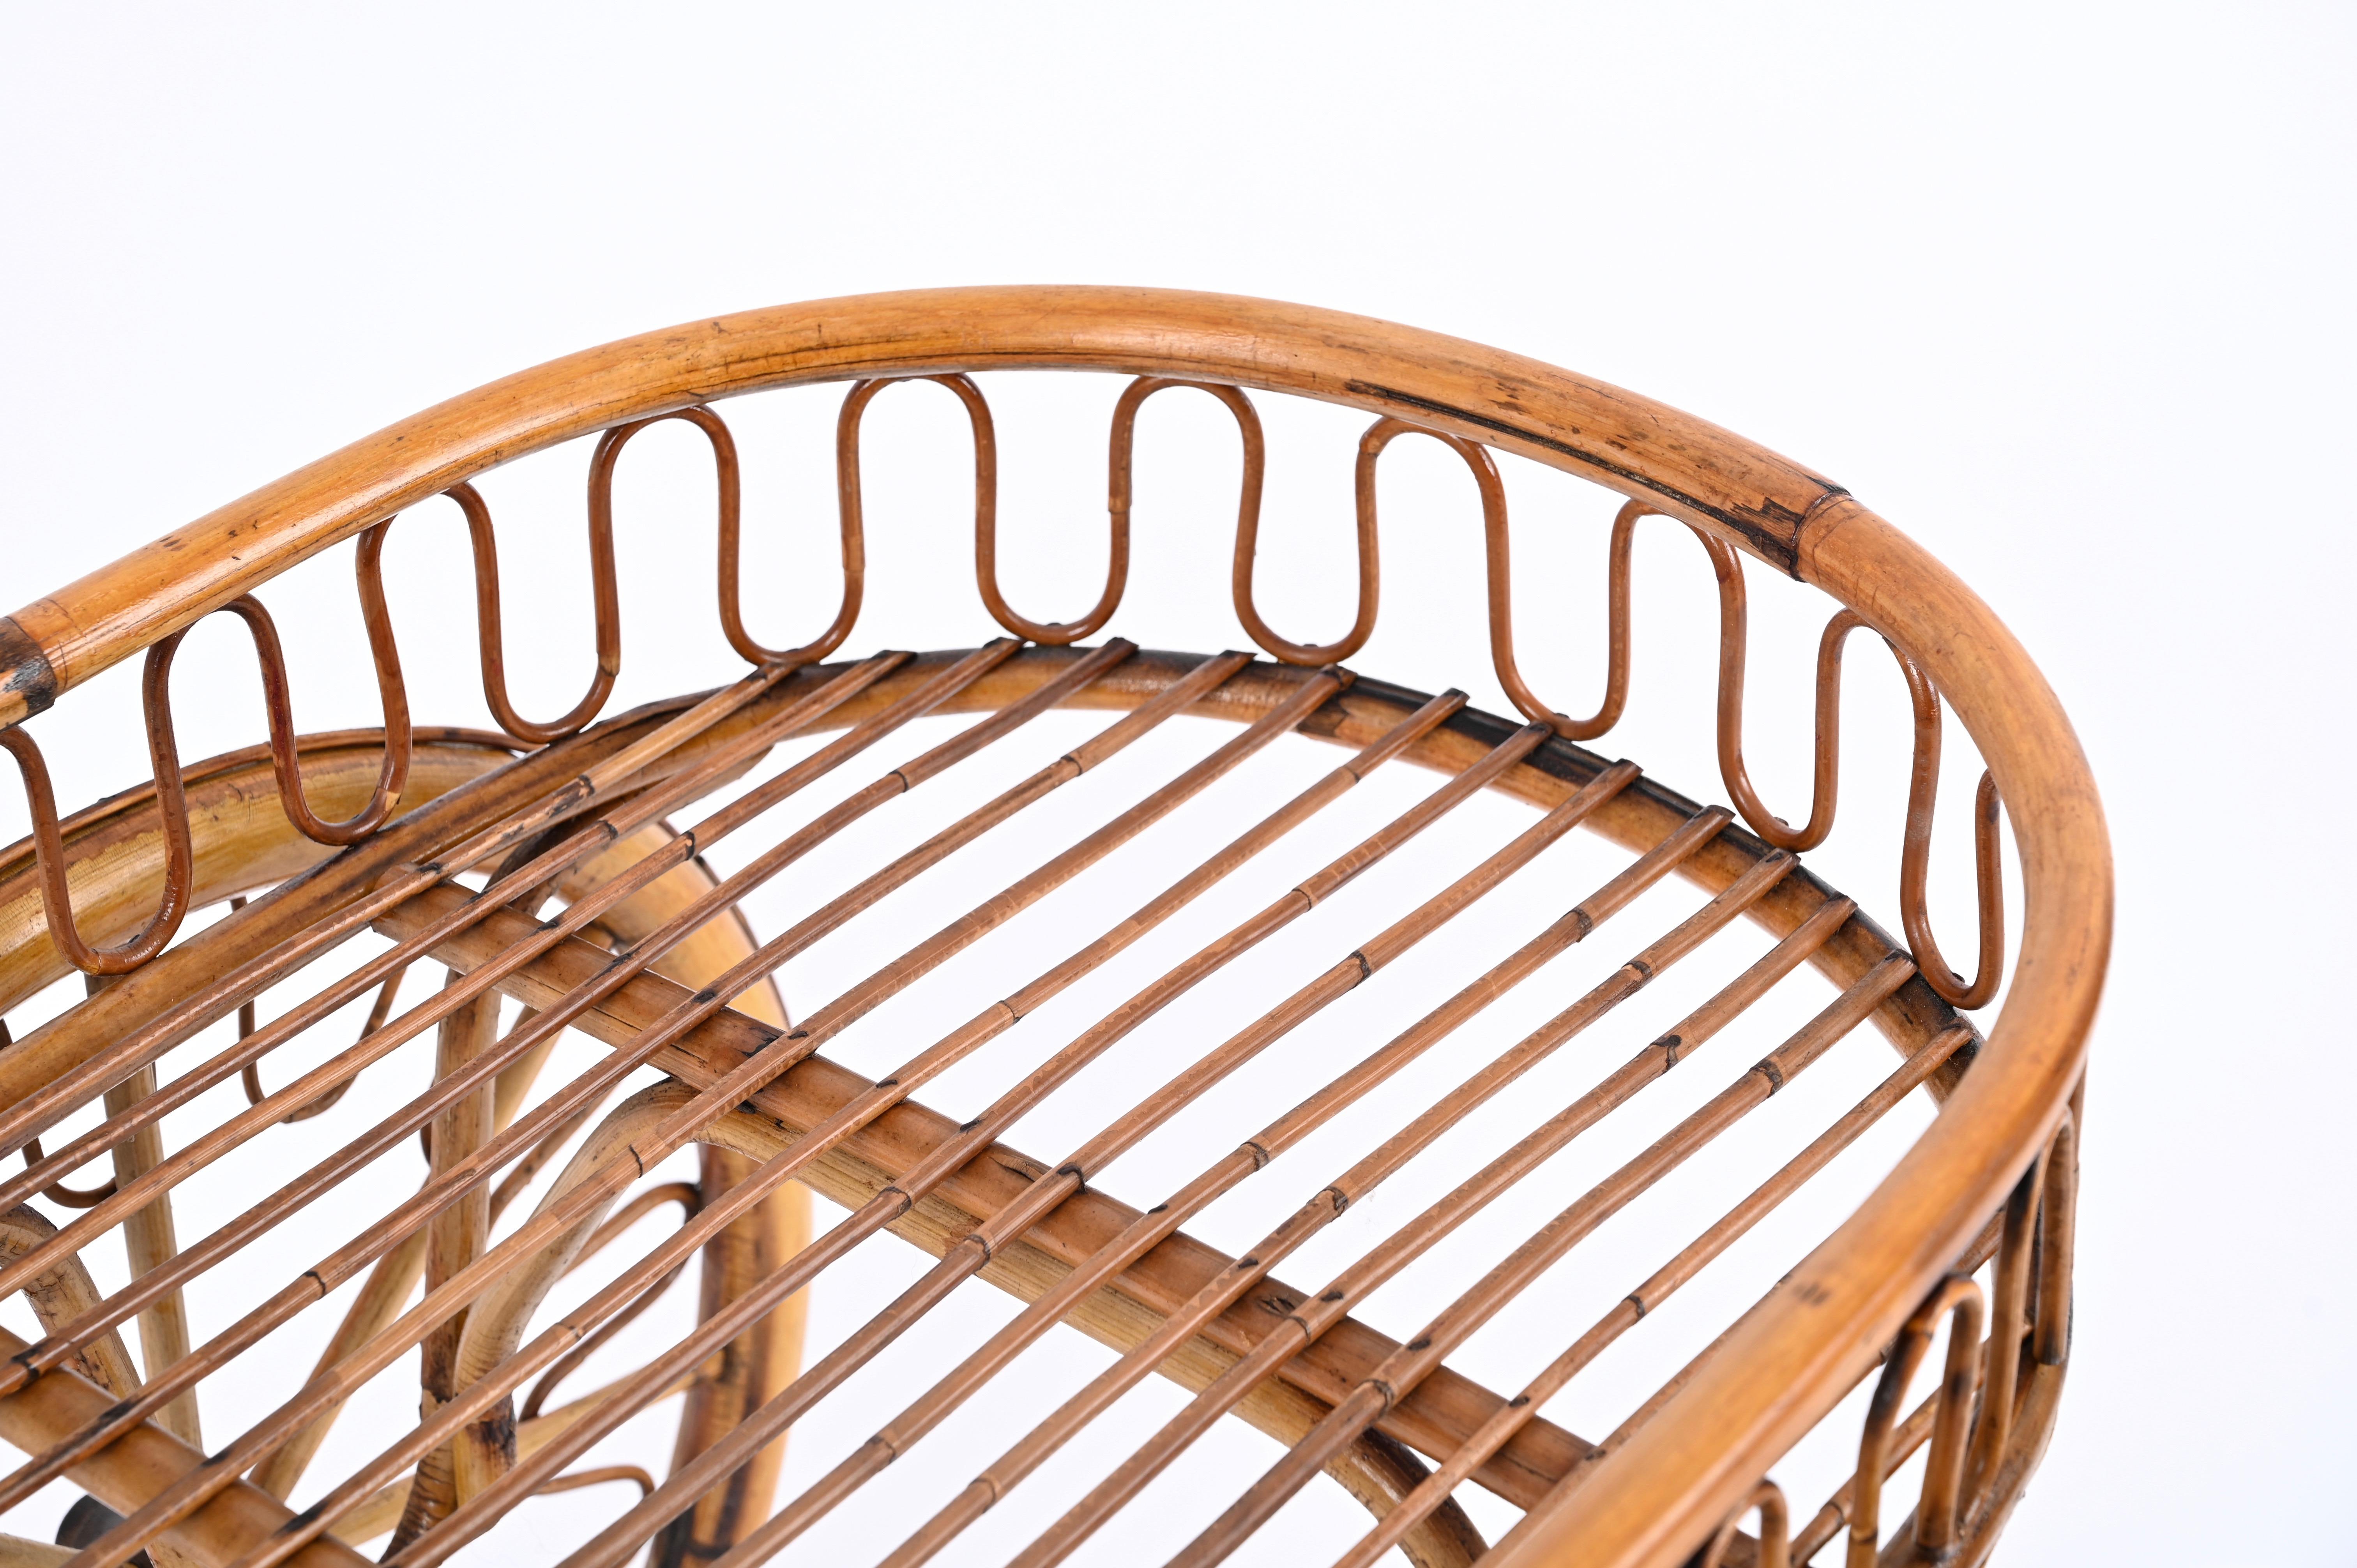 French Riviera Mid-Century Bar Cart in Rattan, Bamboo and Wicker, France 1950s For Sale 1